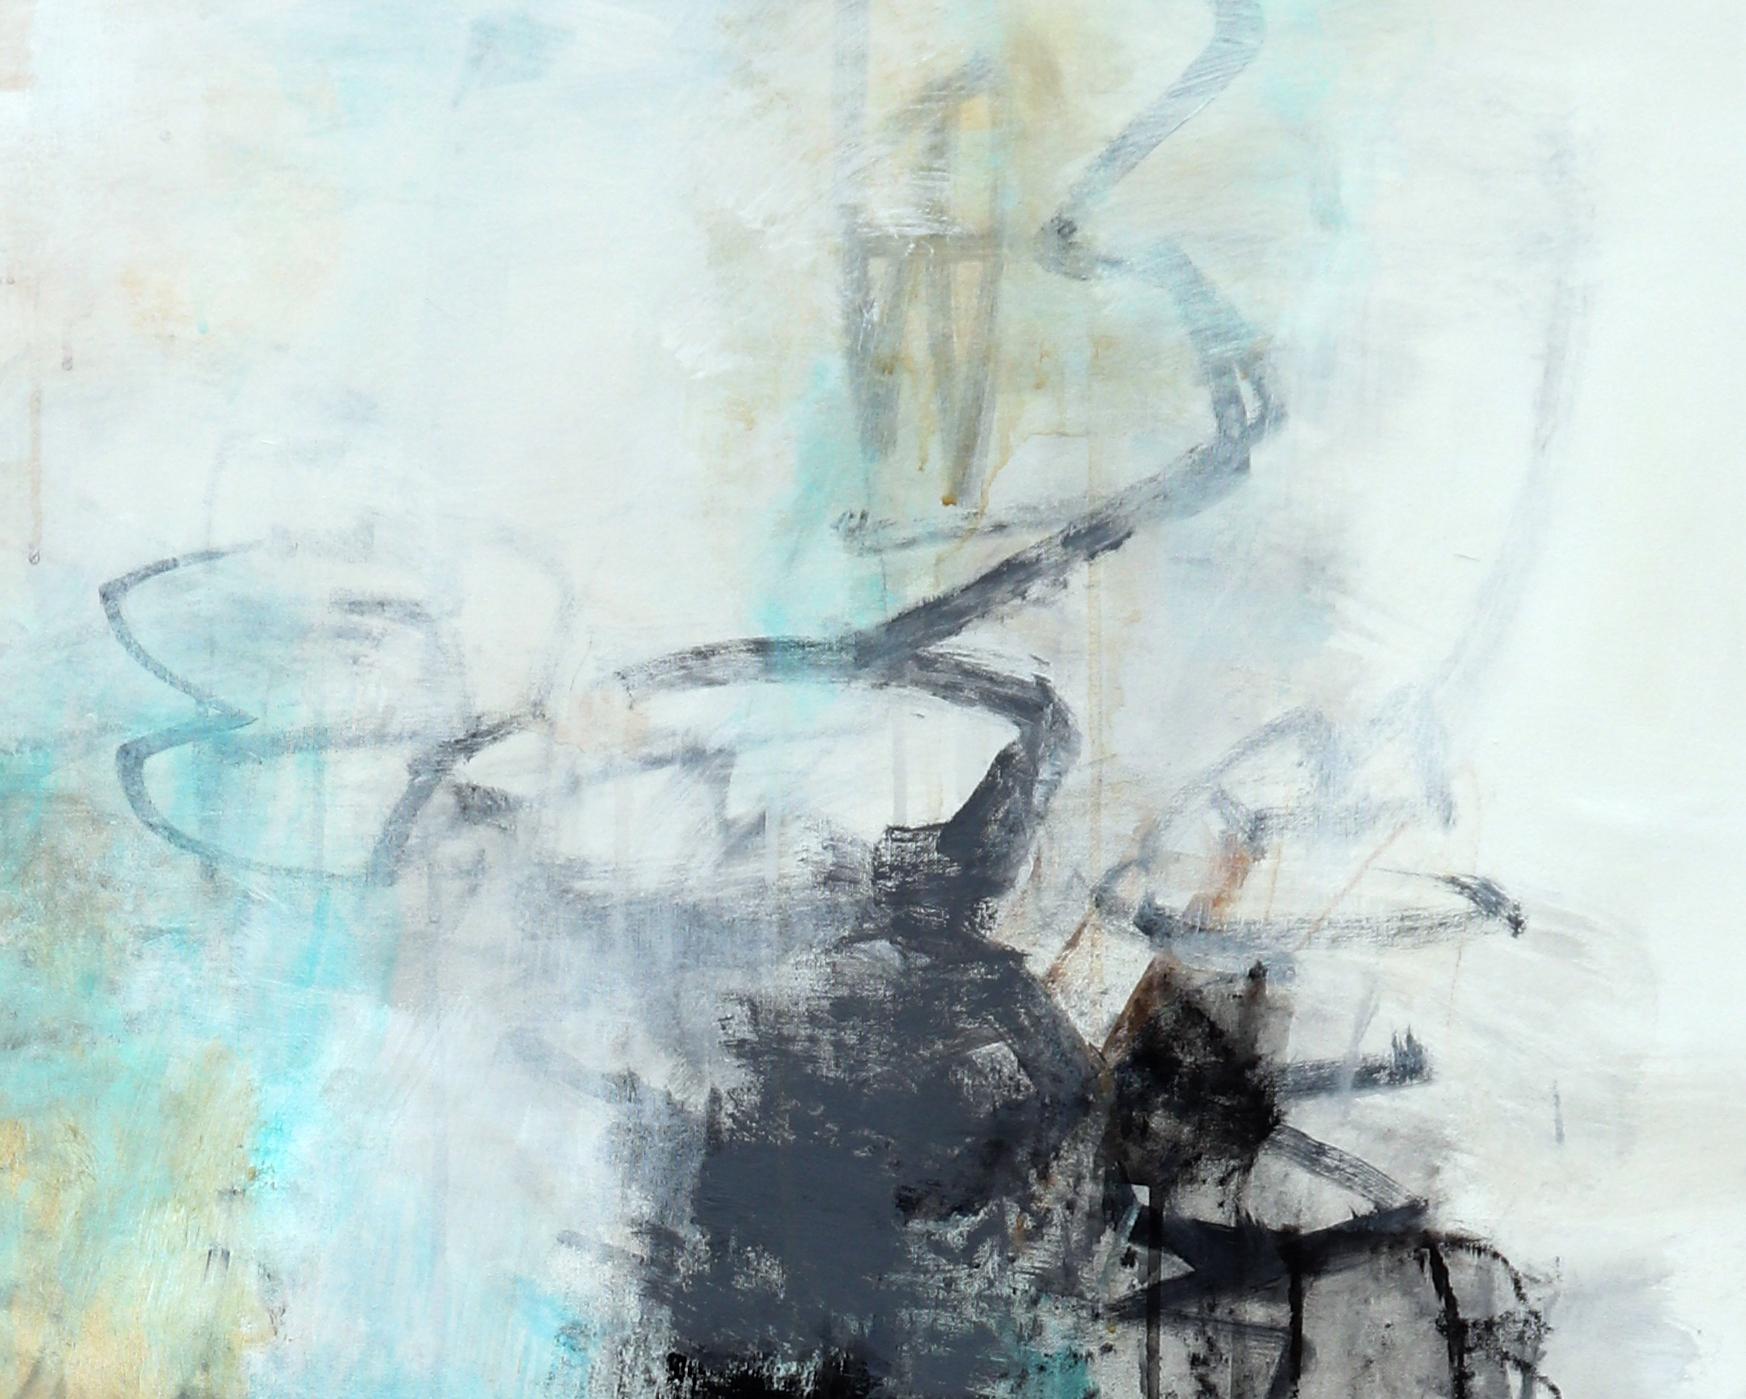 
Blue Abstract

About the Artist: Julie Schumer, a native of Los Angeles, California, and born in 1954, lives and paints in Santa Fe, New Mexico. She discovered her love of abstract expressionism at age 5. A lawyer for many years, Schumer is